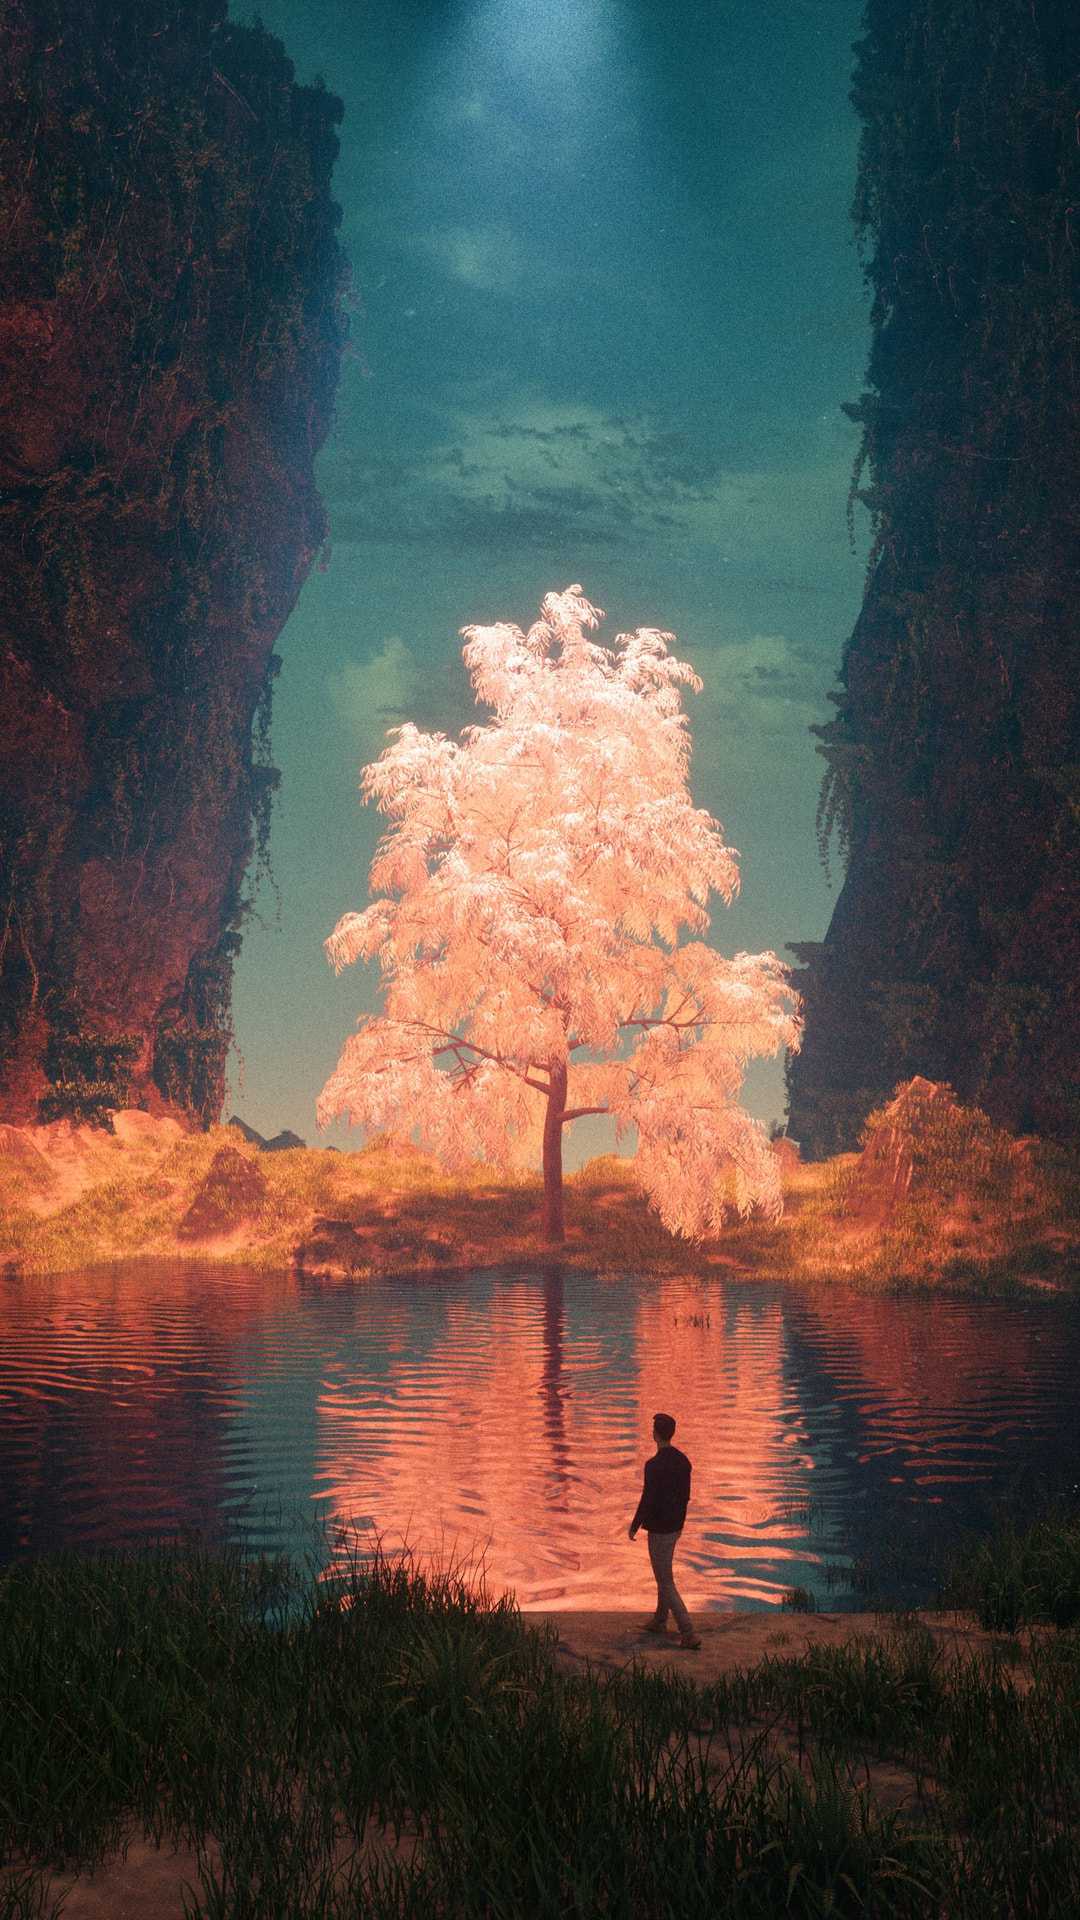 Magical Tree IPhone Wallpaper - IPhone Wallpapers : iPhone Wallpapers